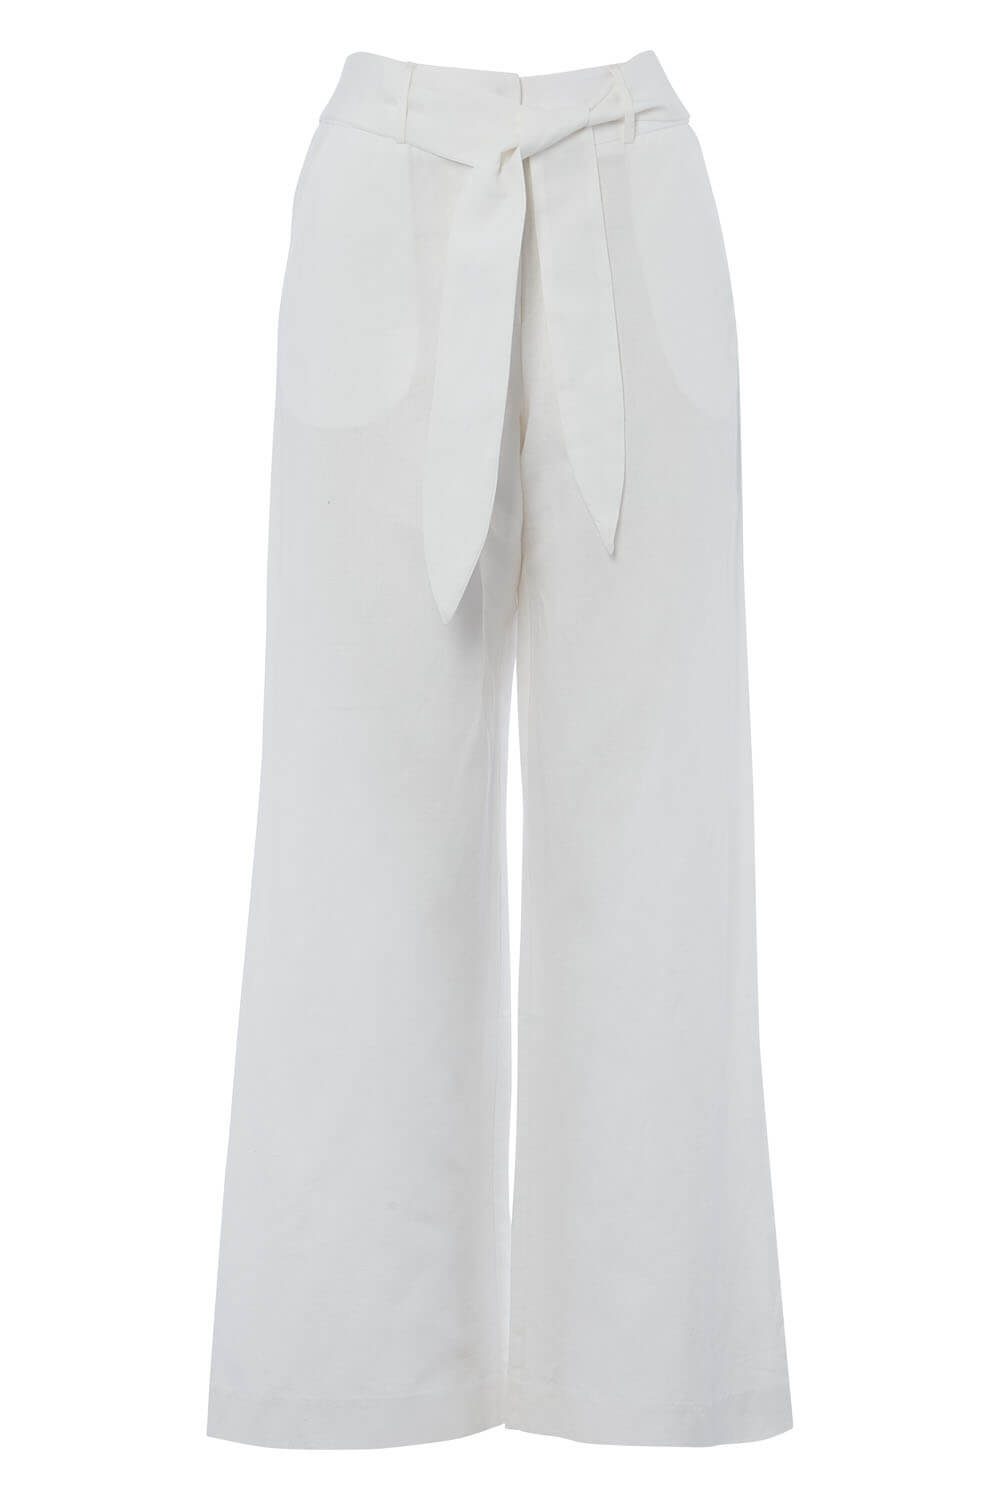 White Linen Wide Leg Trousers, Image 4 of 4